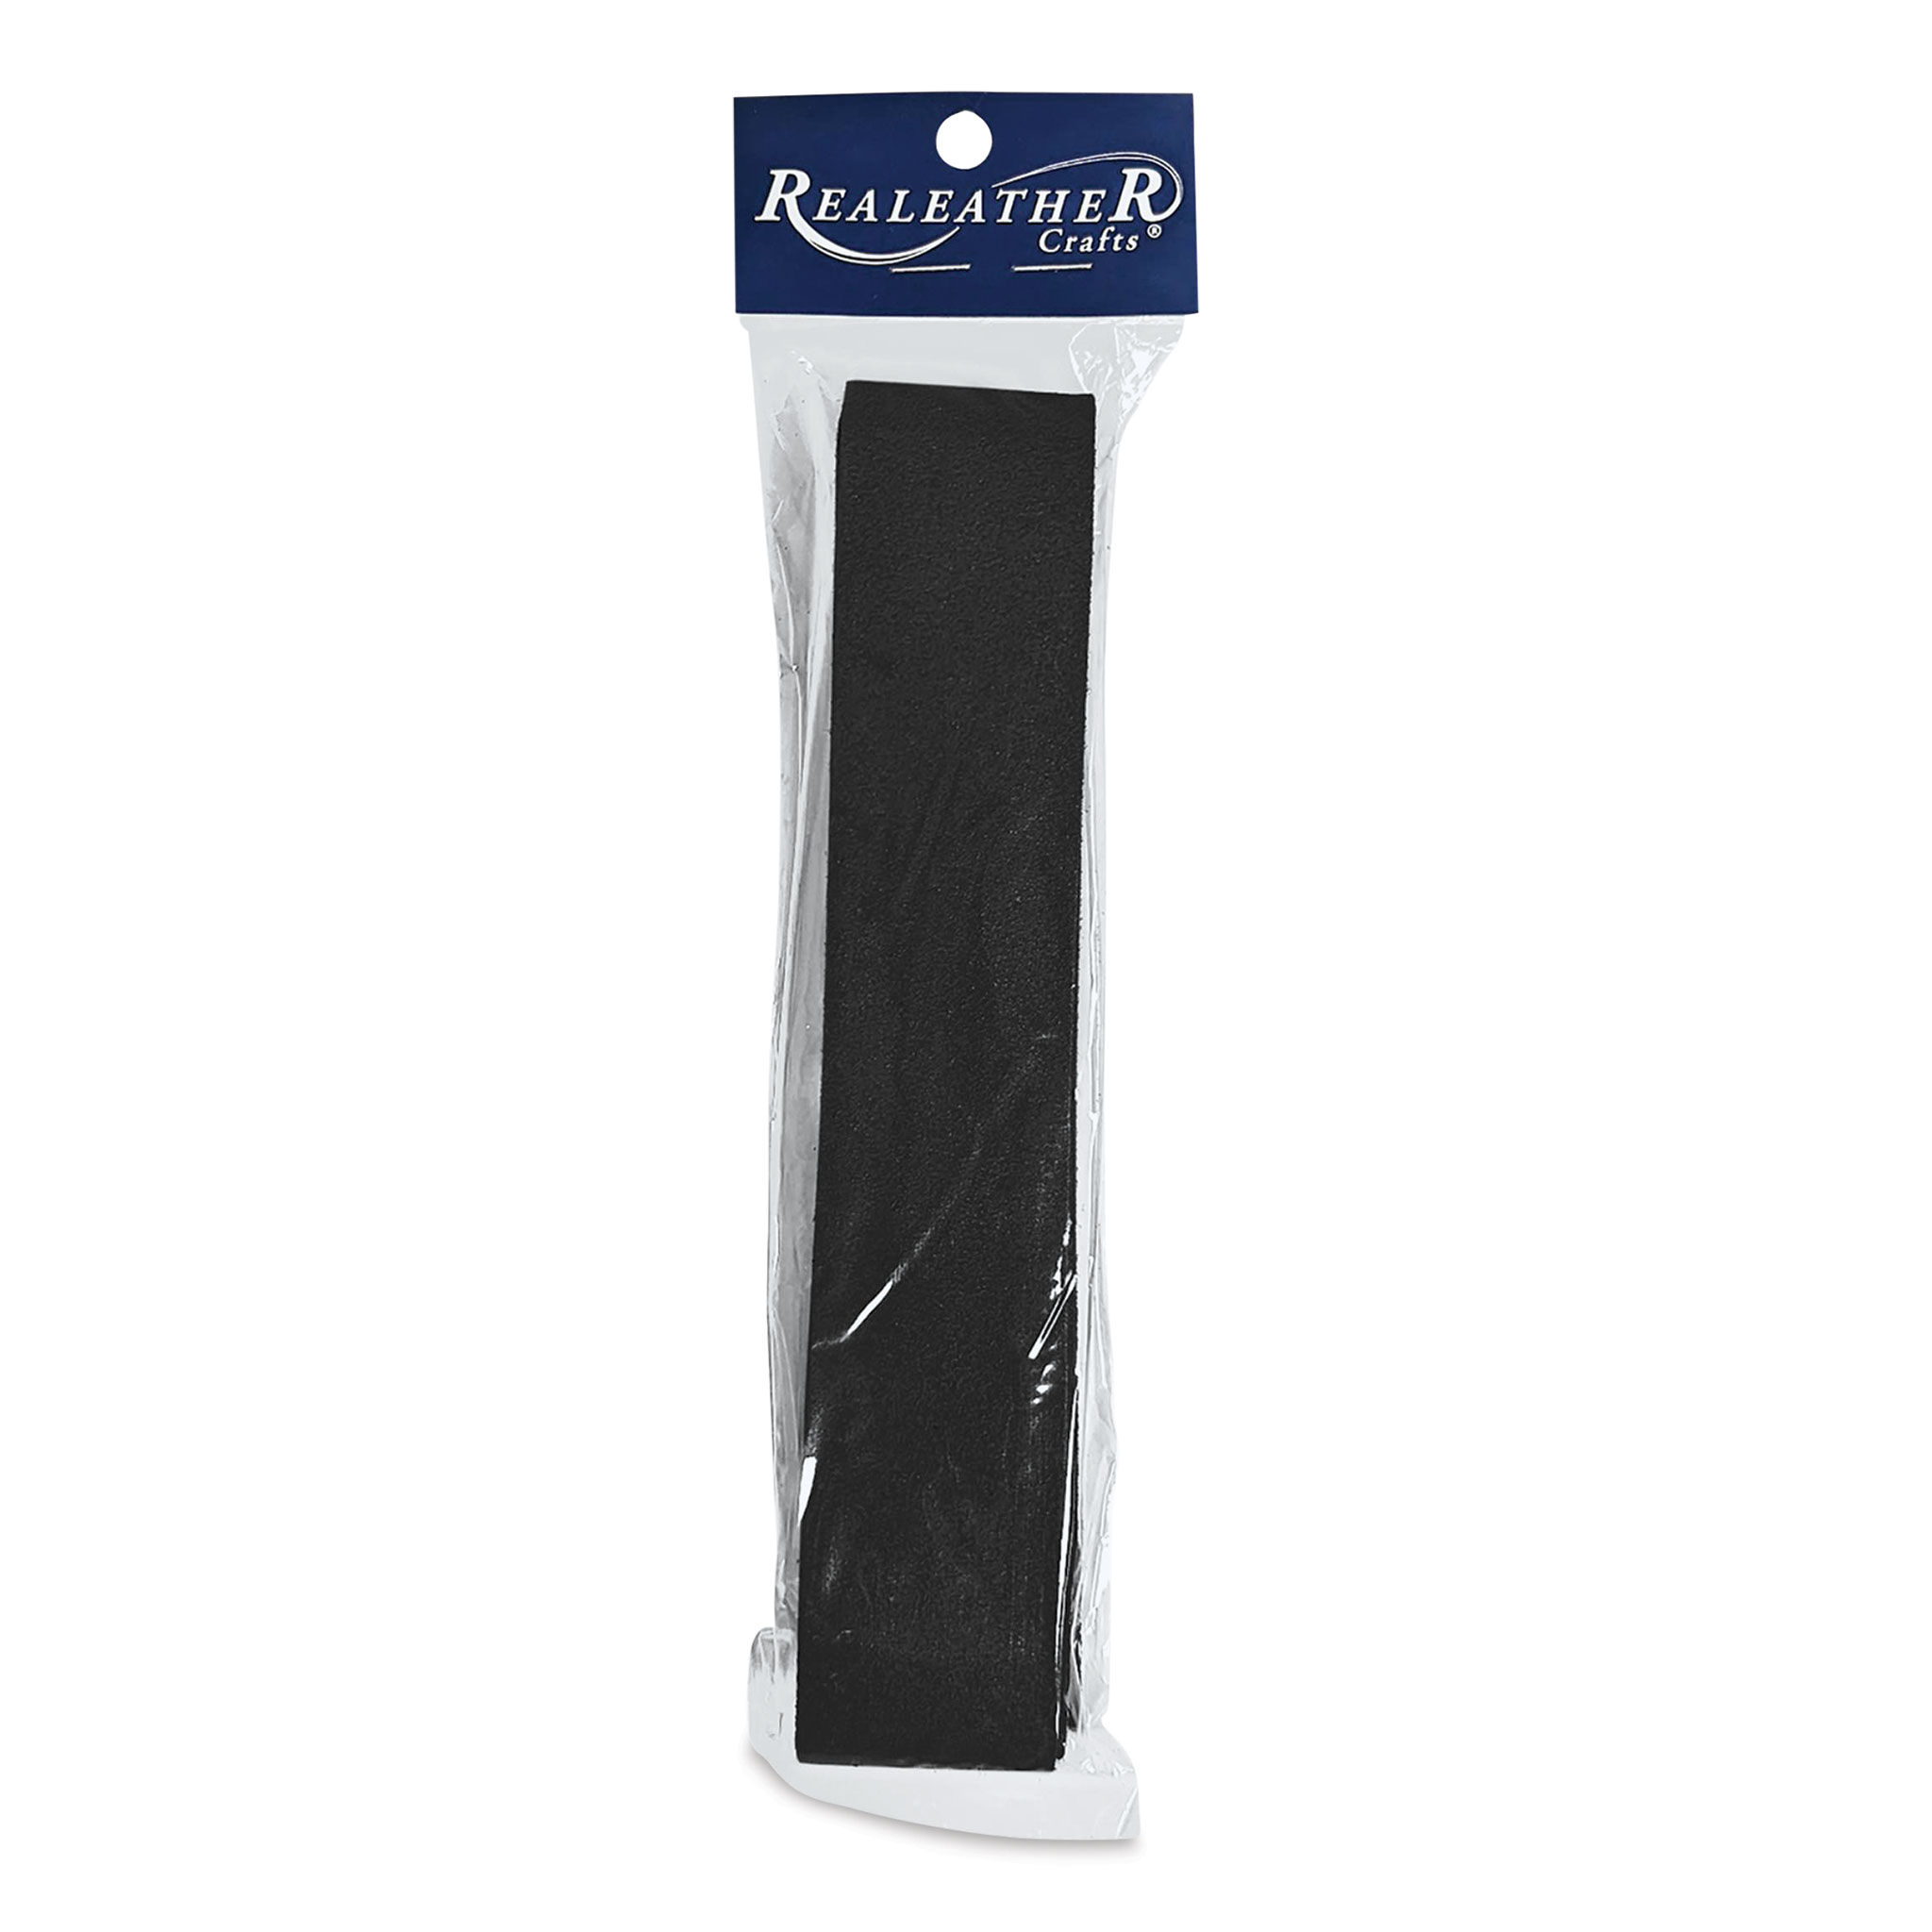 Realeather Leather Strip - Black, 1-1/2" x 42" - image 1 of 1